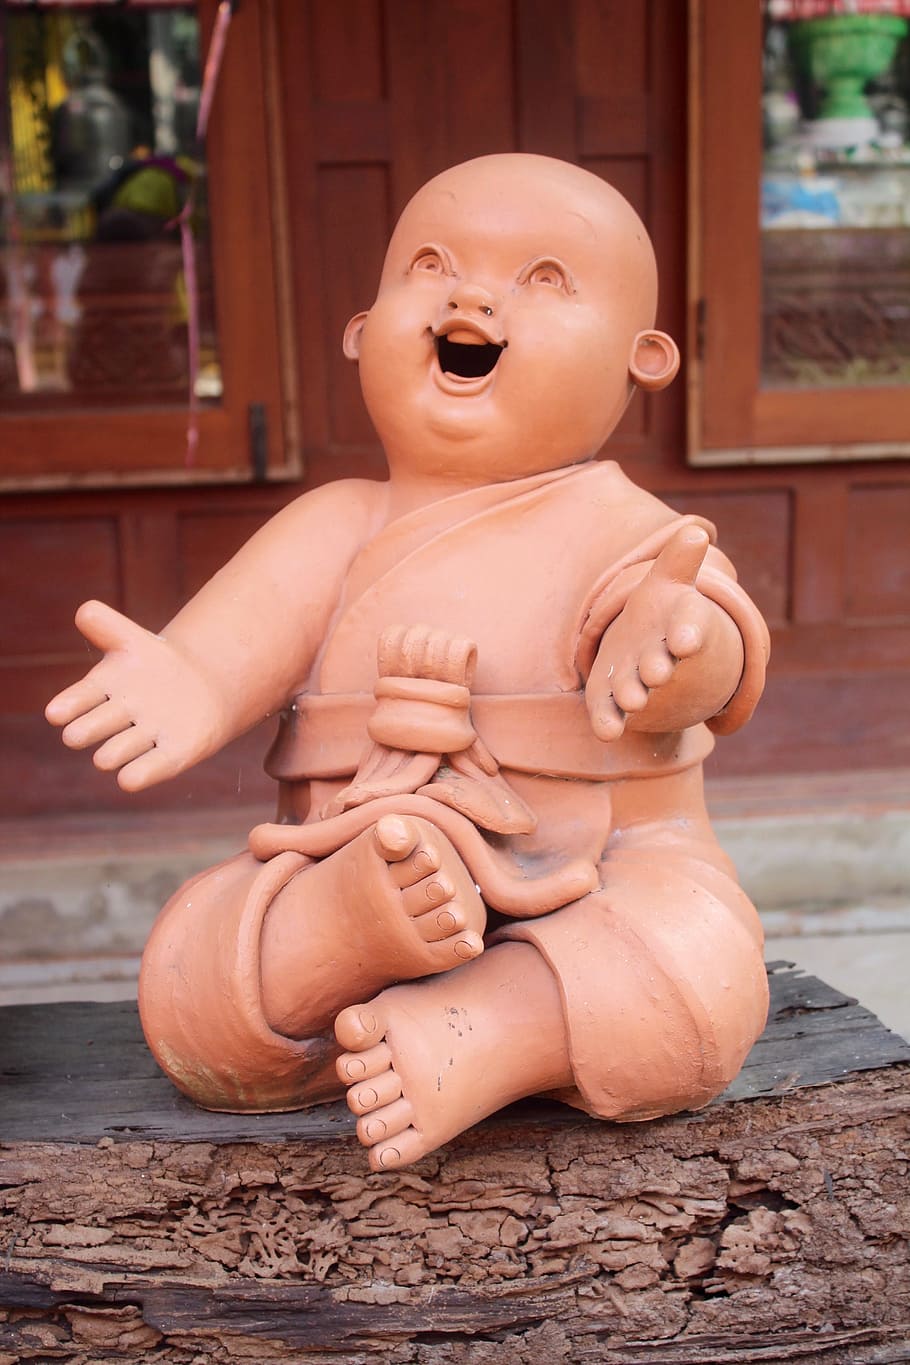 HD wallpaper: baby doll laughing, buddha, figures, stone figure, sculpture  | Wallpaper Flare